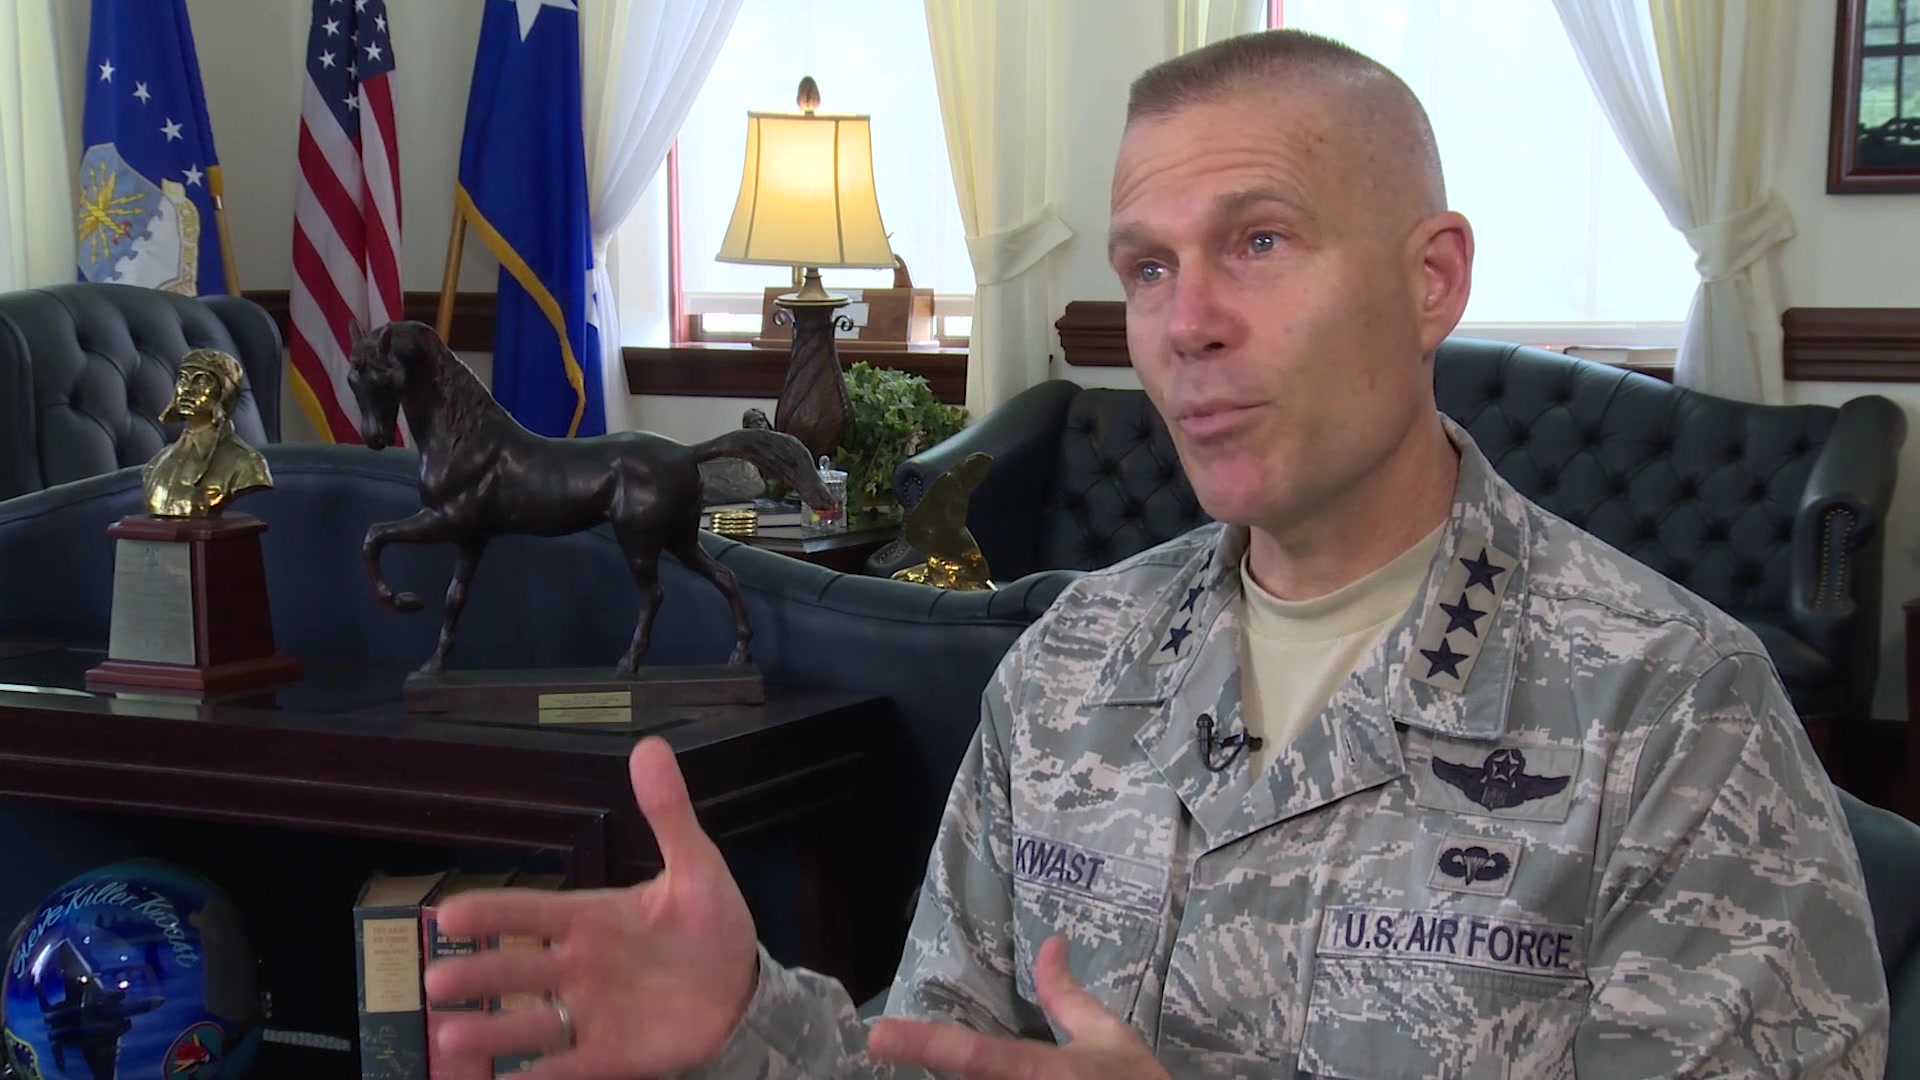 Lt. Gen. Steve Kwast discusses what he enjoys most about being the Commander of Air Education and Training Command!